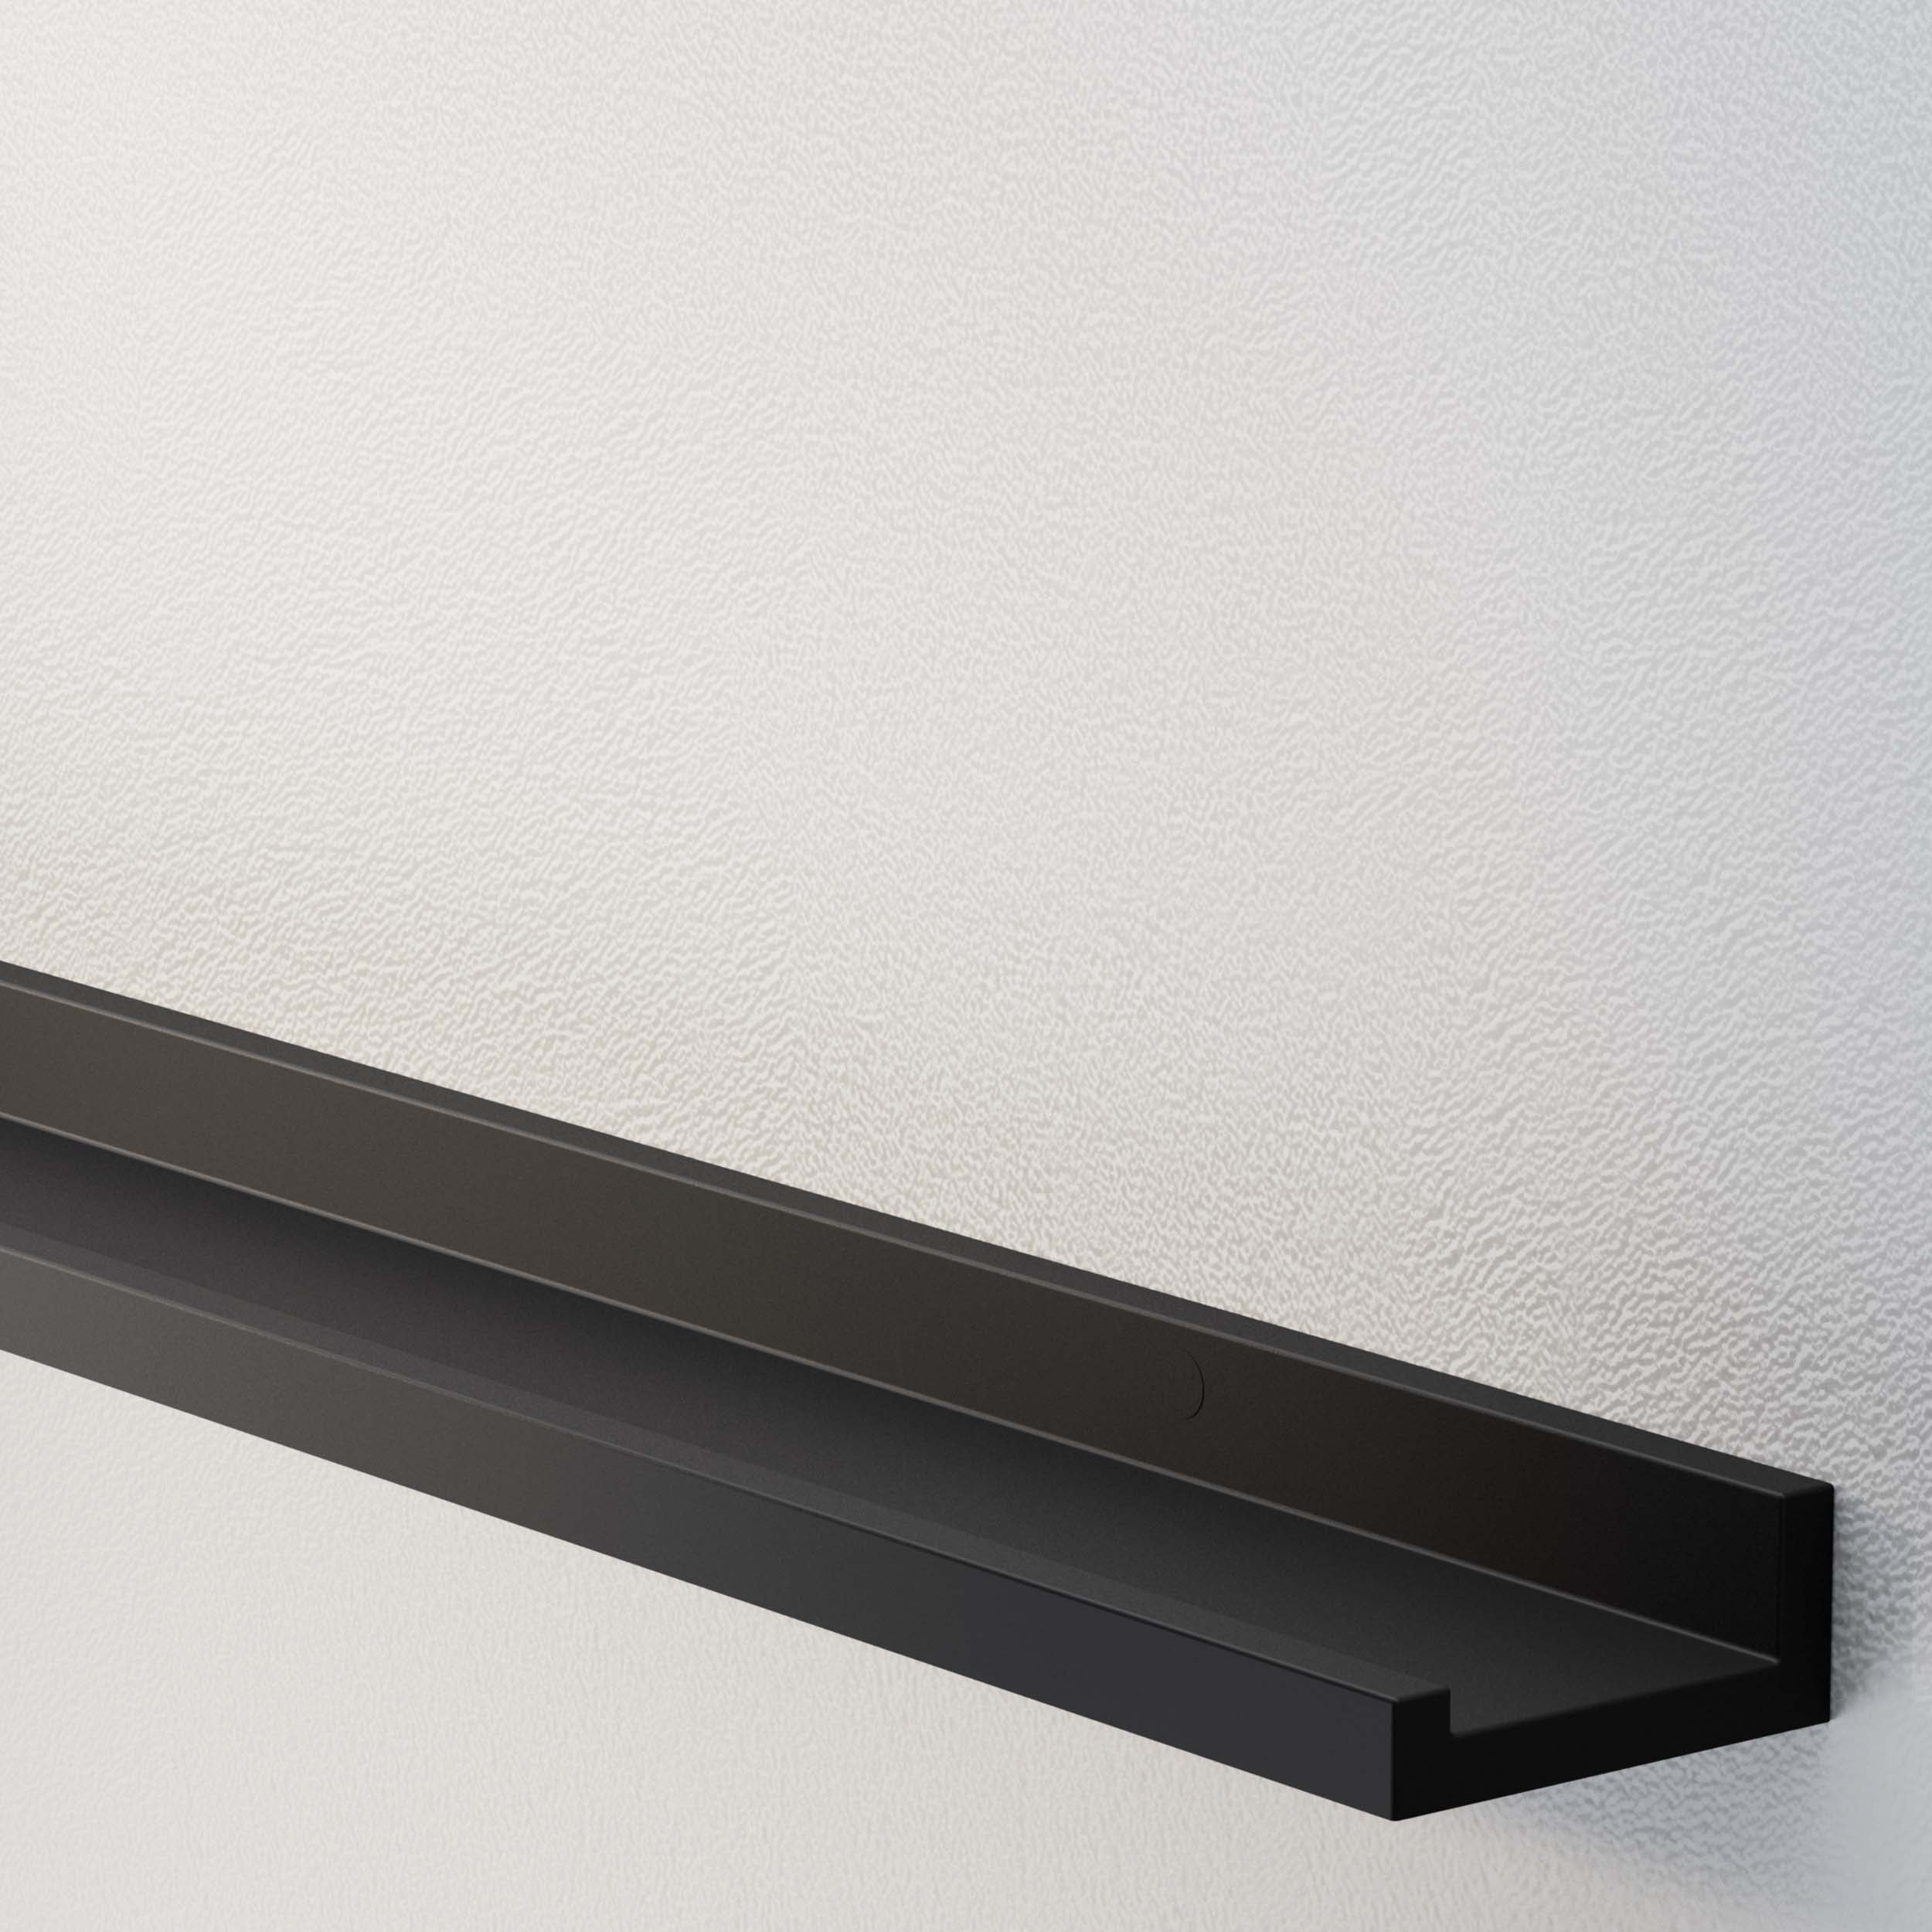 An angled view of an empty black wall shelf on a textured white wall.